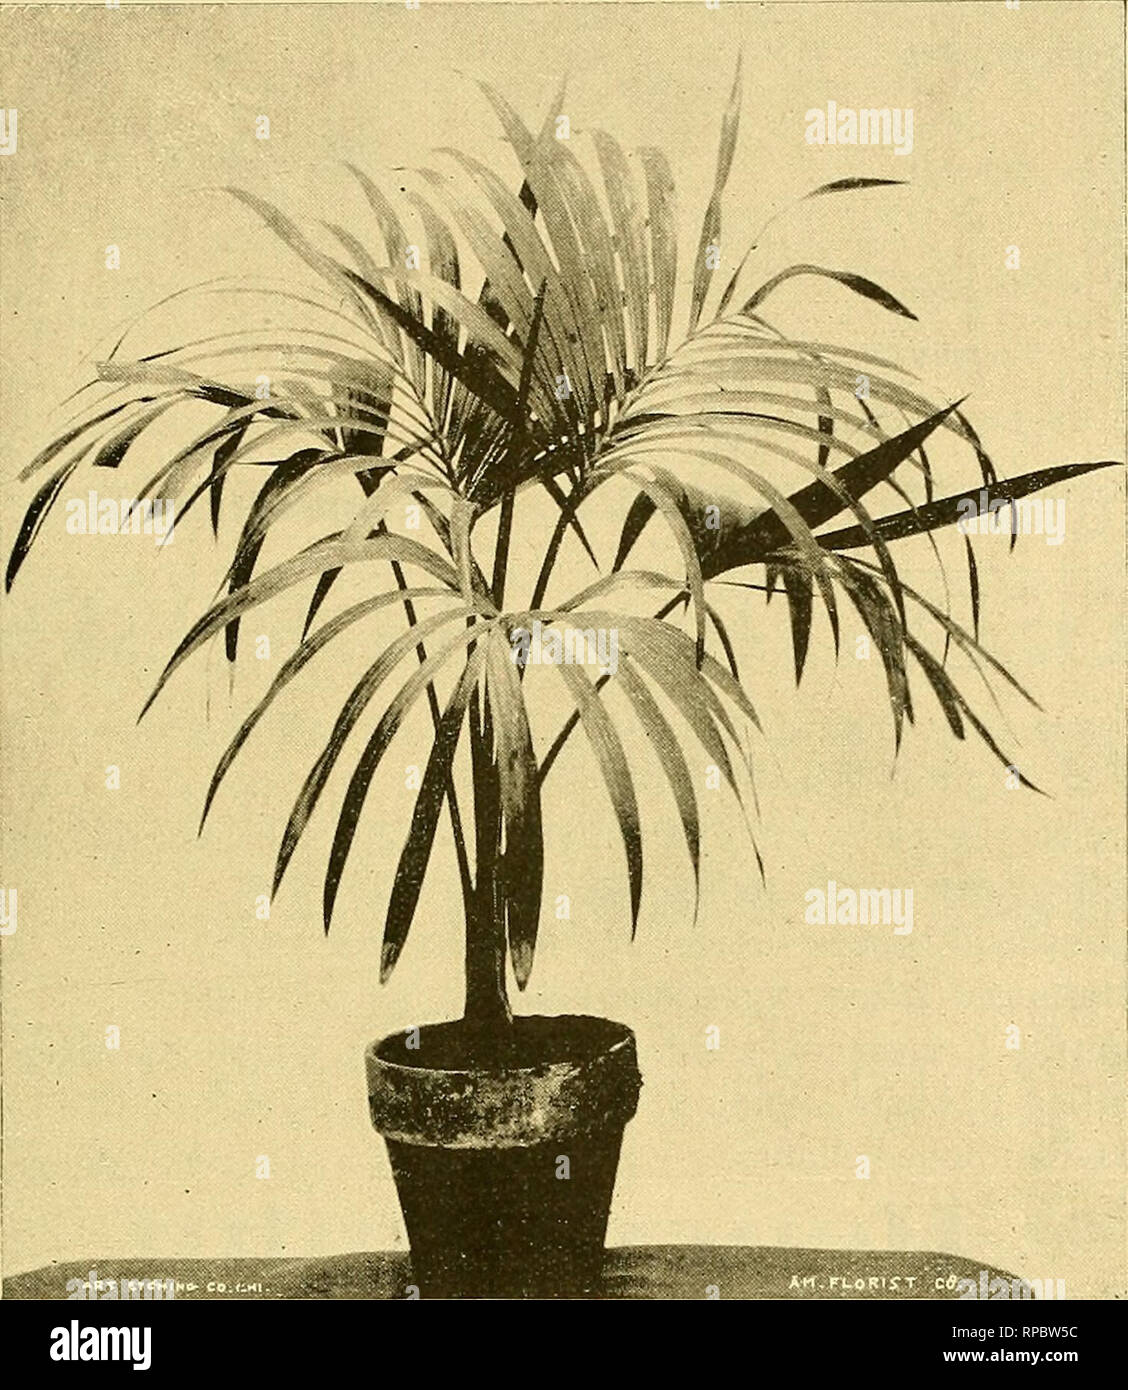 . The American florist : a weekly journal for the trade. Floriculture; Florists. OUR SPECIALTIES. 100,000 Palms, ready for decorating purposes. Clean healthy stock, viz: Areca lutescens, Latania borbonica, Kentia Belmoreana, K. Forsteriana, Caryota urens, C. Sobolifera, Rhapis flabelliformis, R. humilis. Phoenix rupicola, P. reclinata. The finest collection of Winter blooming ORCHIDS, in excellent condition, in almost every size and variety. Cattleyas, Cwlog-yiies, Cyi)rii)ediiiius, Deiidrobiiiiiis, Odoutoglossuiiis, Oiicidiums, and many other varieties. Stove and Foliage Plants5 of these we h Stock Photo